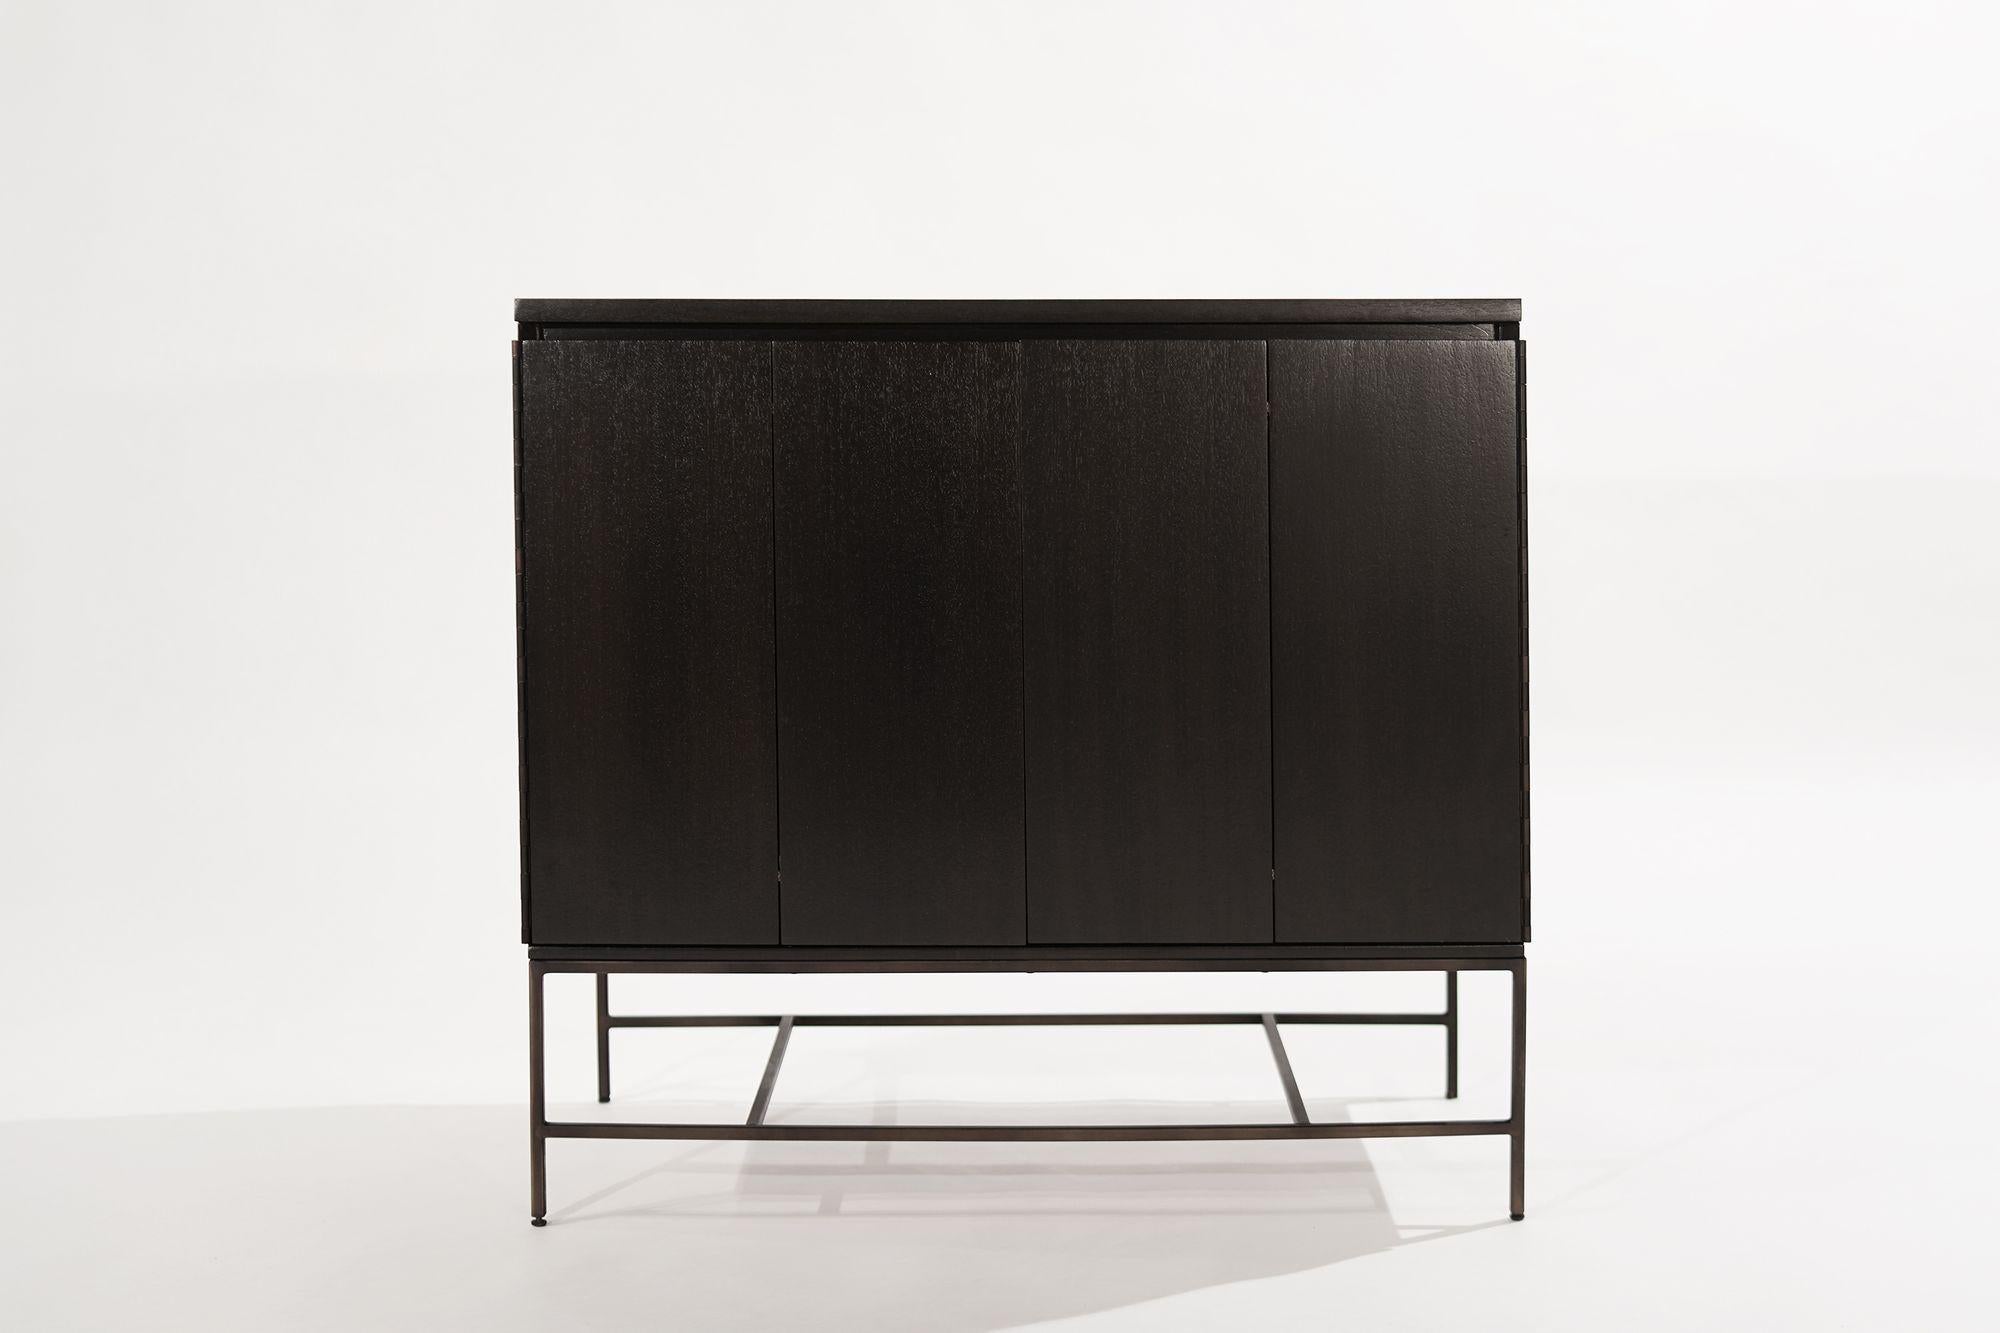 A classic cabinet designed by Paul McCobb for his Calvin Group line of furnishings, circa 1950-1959. Featuring bi-fold doors which open up to reveal four drawers, providing ample storage space. The mahogany case has been completely restored and